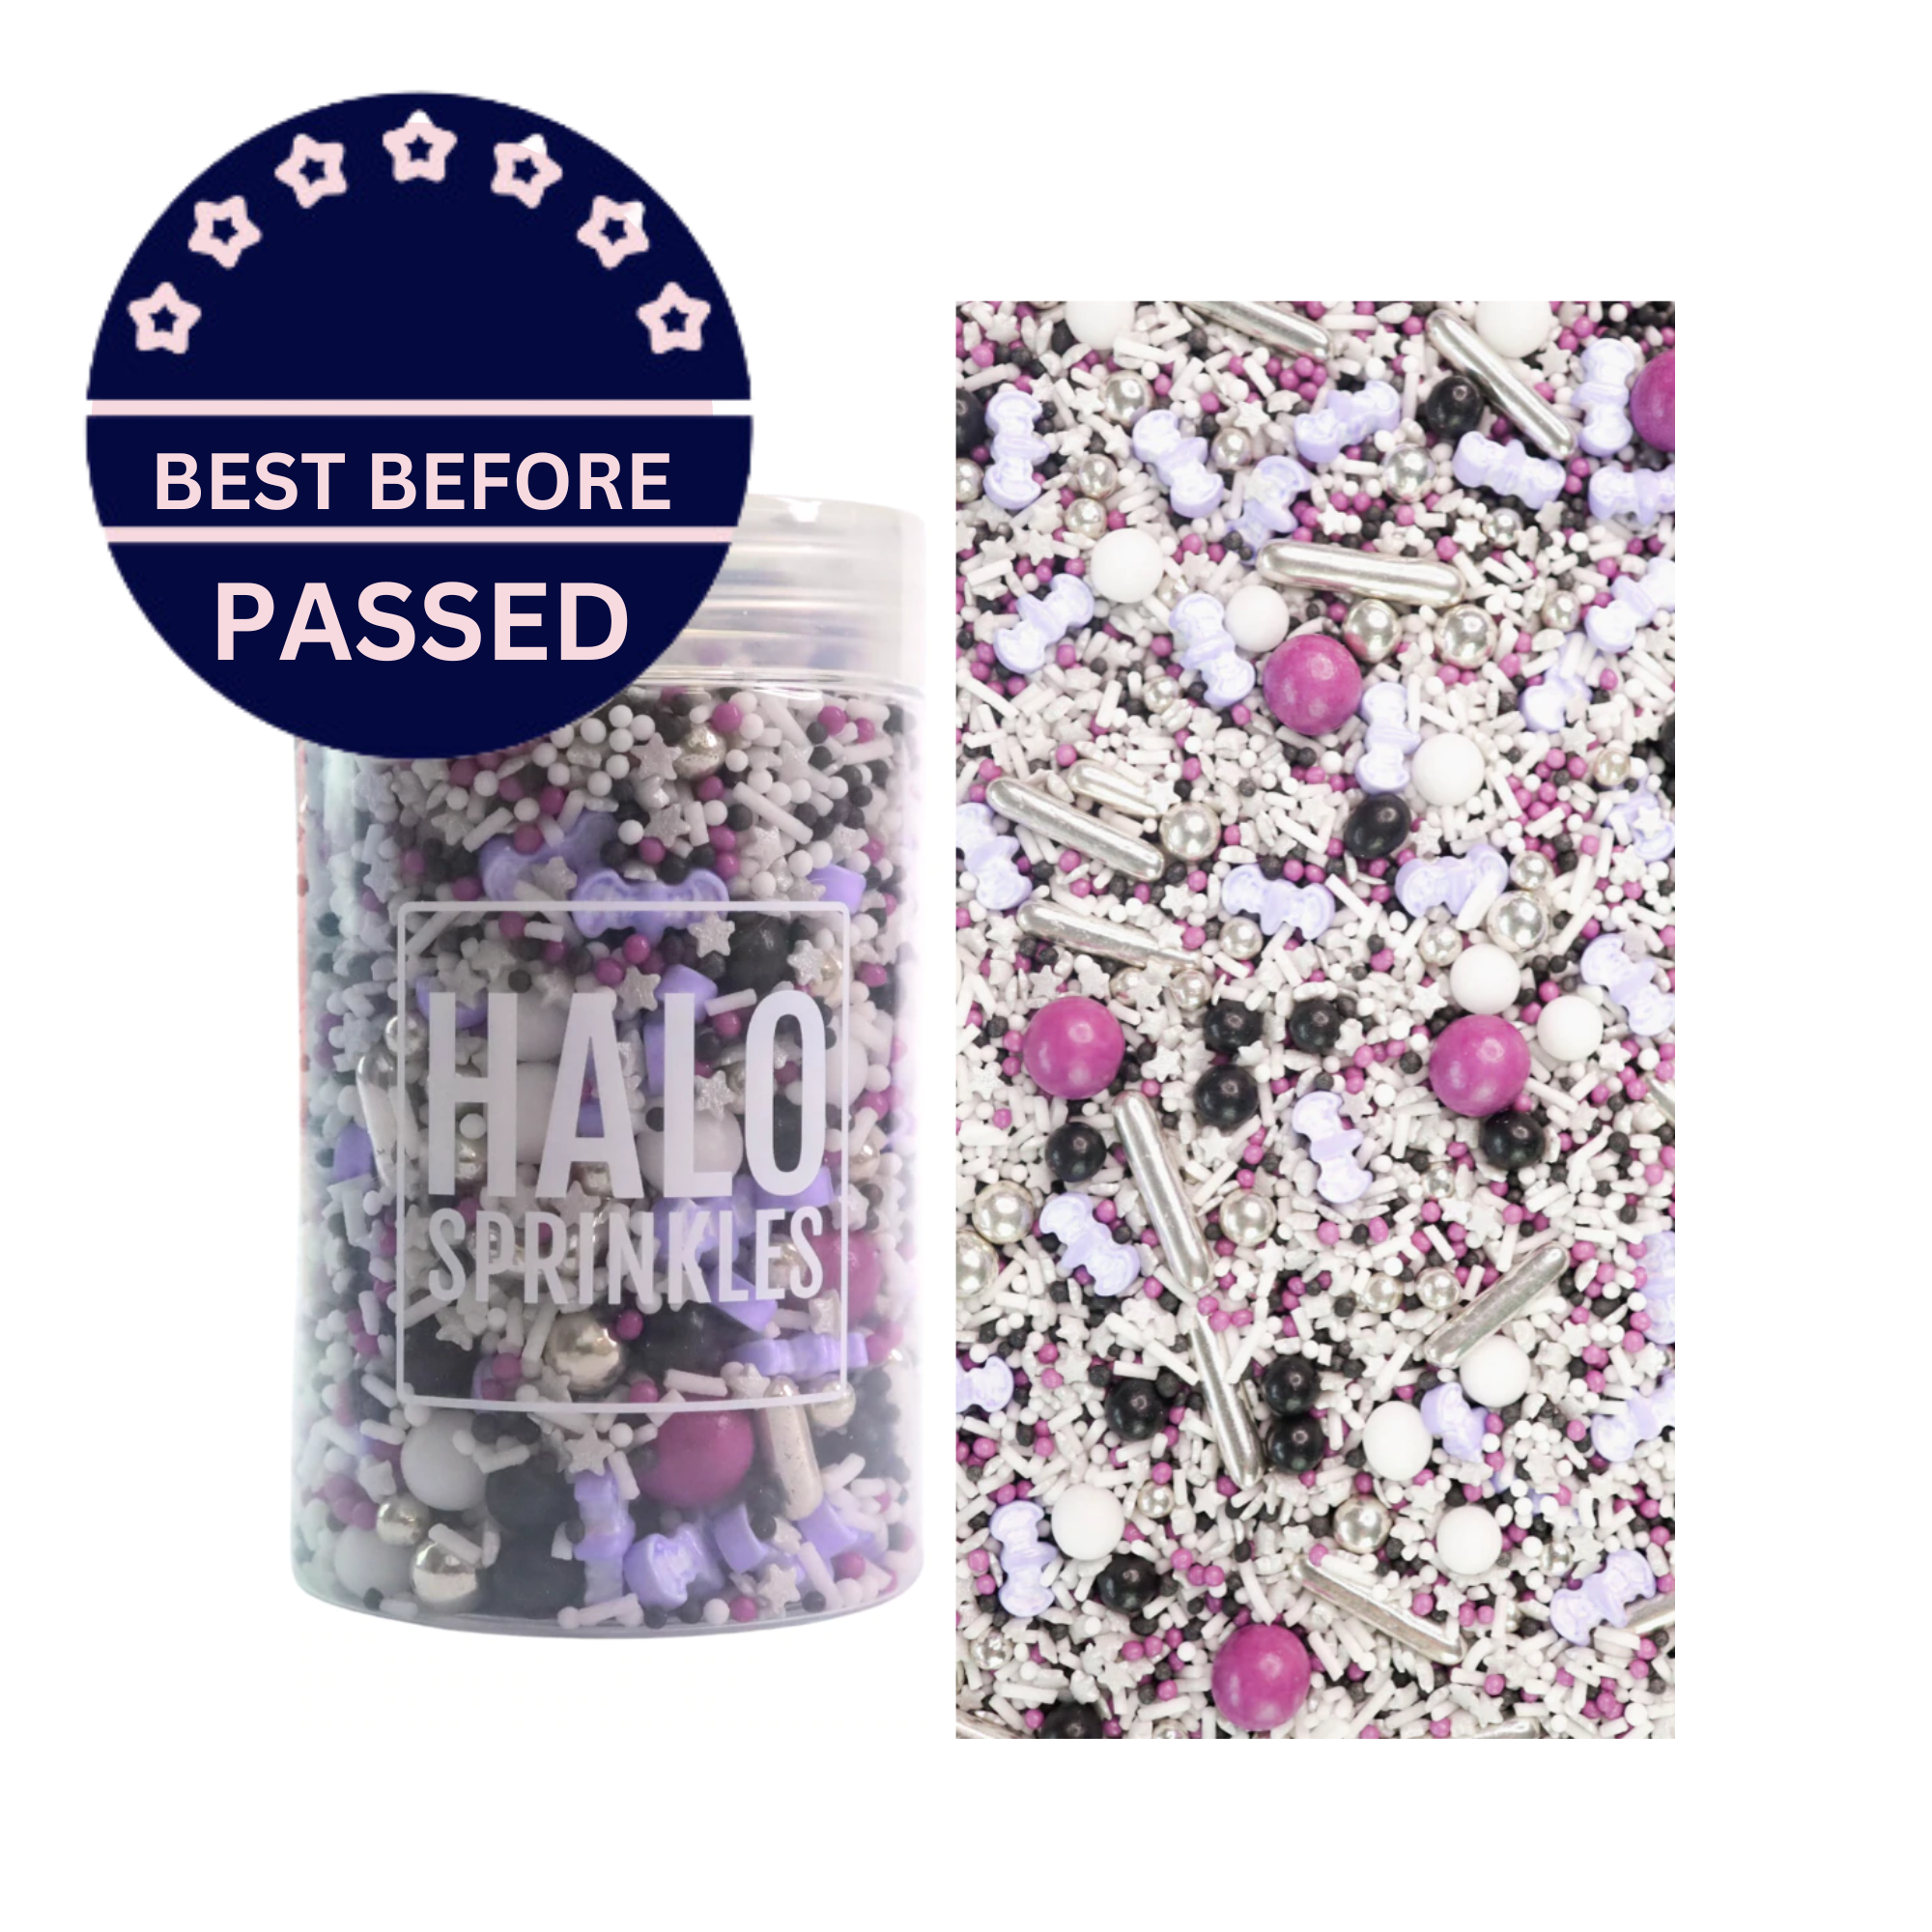 BB PASSED 01/24 Halo Sprinkles Luxury Blend - Howl You Doin' - Purple, Lilac, Silver, Black & White